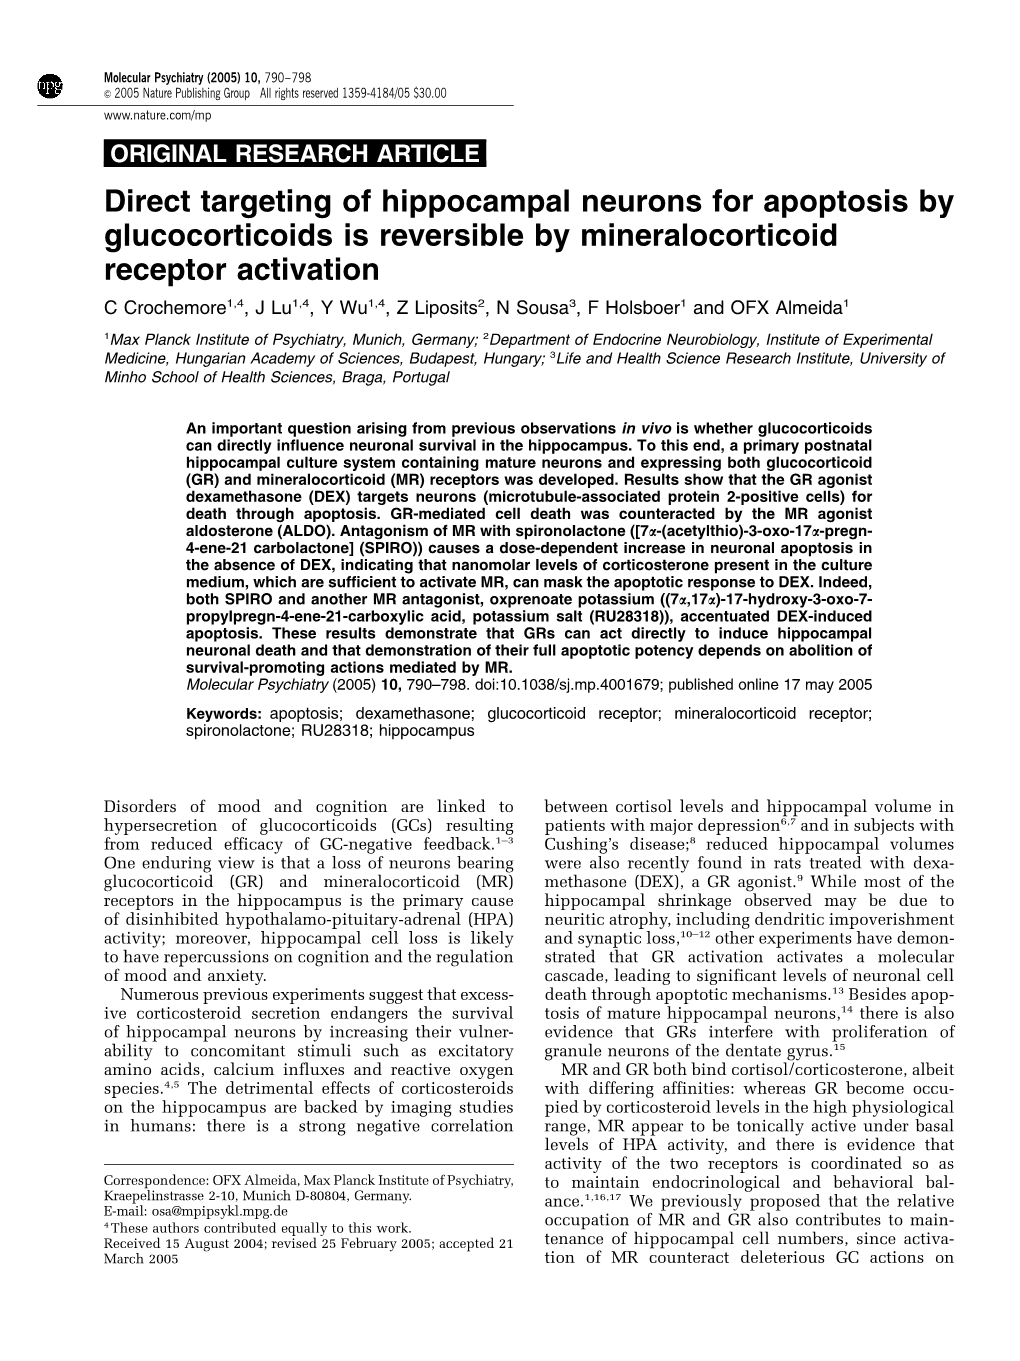 Direct Targeting of Hippocampal Neurons for Apoptosis By